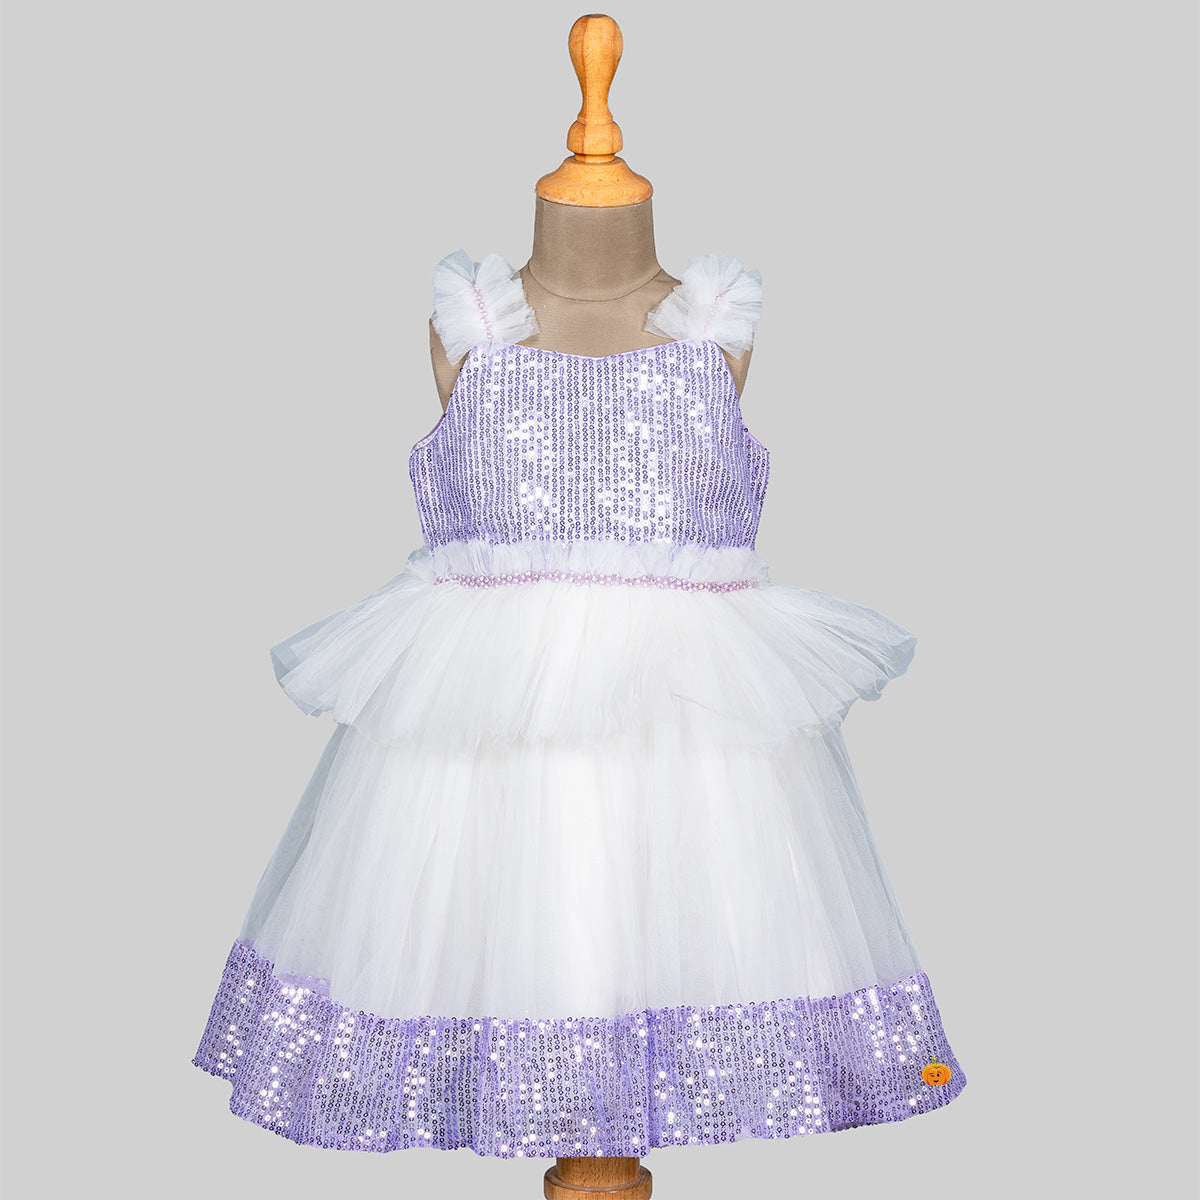 Stunning White Baptism Clothing For Baby Girls 1 2 Year Birthday, Wedding,  And Party Christening Outfit Unique Designs From Hongfei789, $41.82 |  DHgate.Com